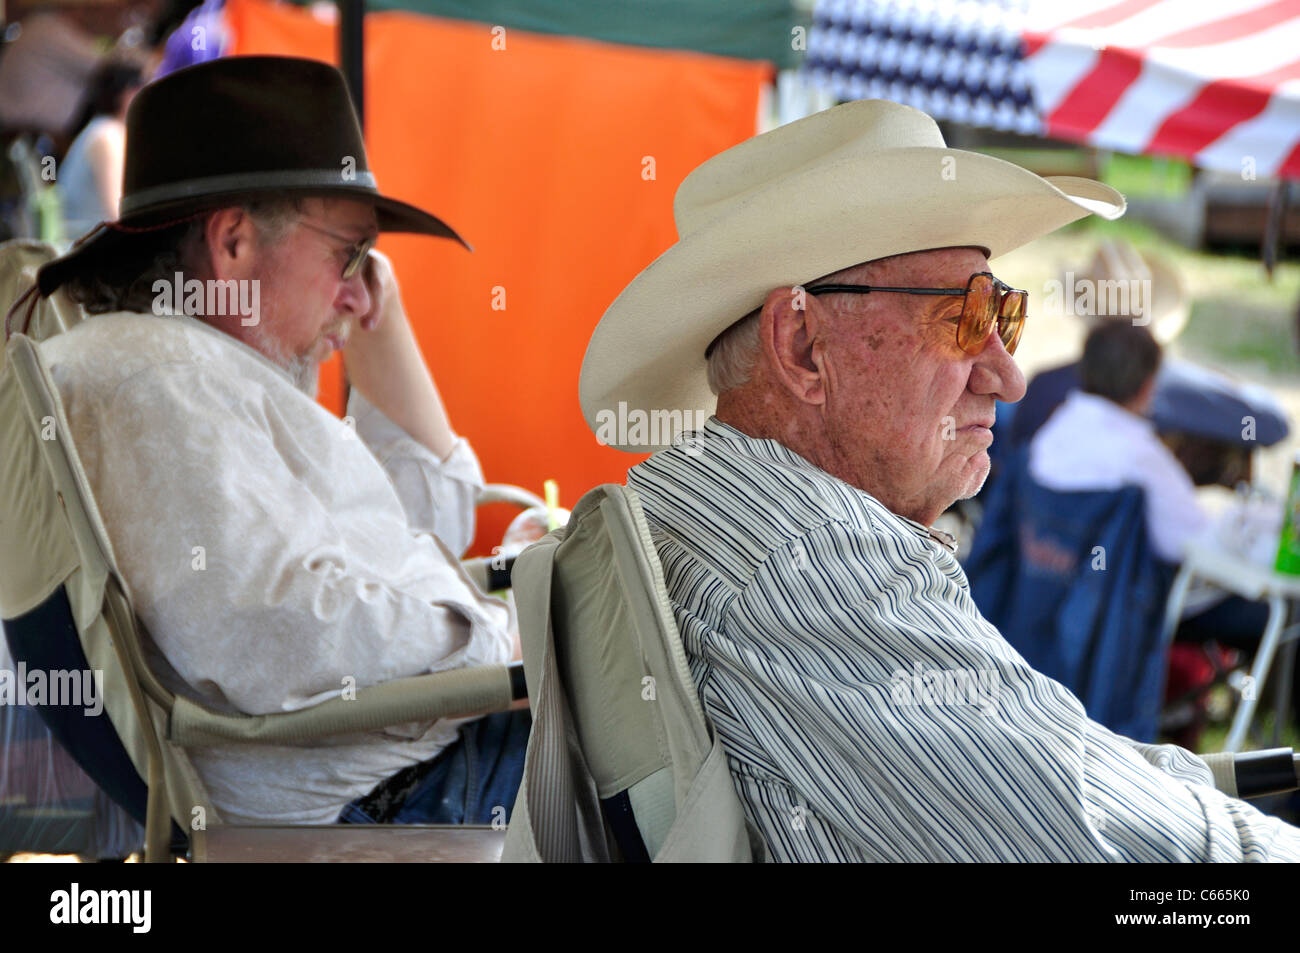 Contestants at a fast draw competition during 'Pioneer Days' taking a break Stock Photo